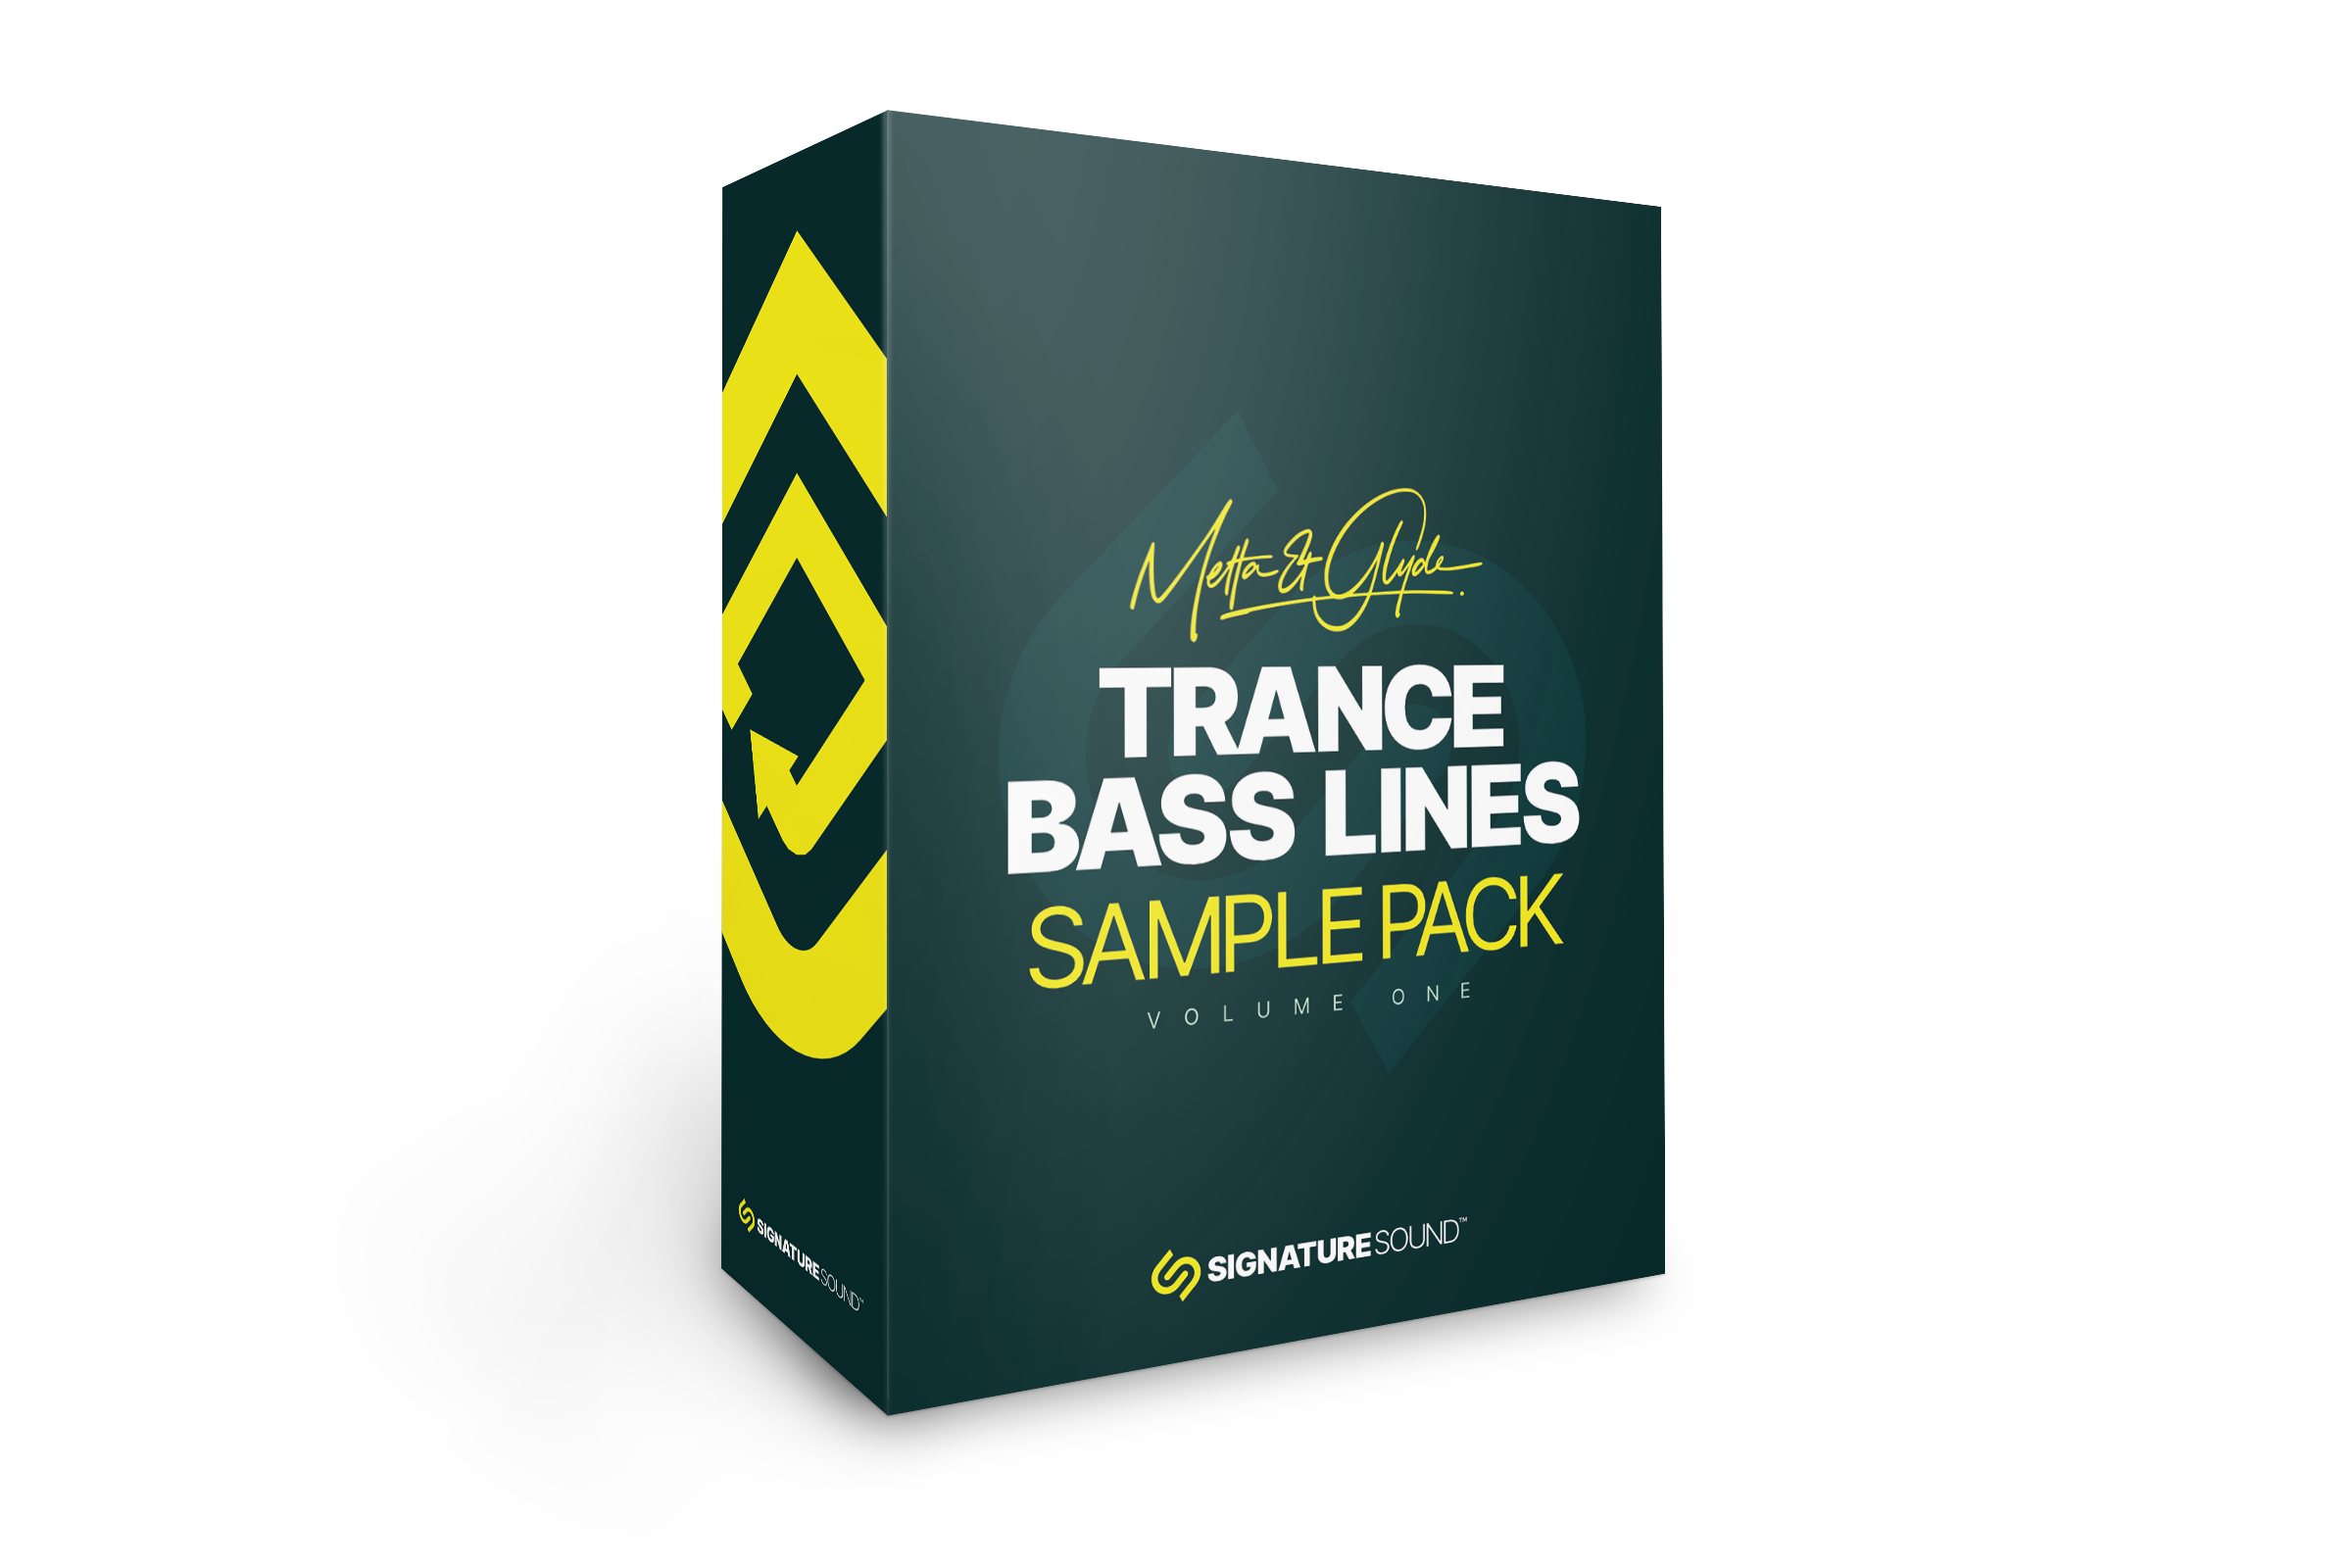 Metta and Glyde Trance Basslines [Sample Pack] Volume One